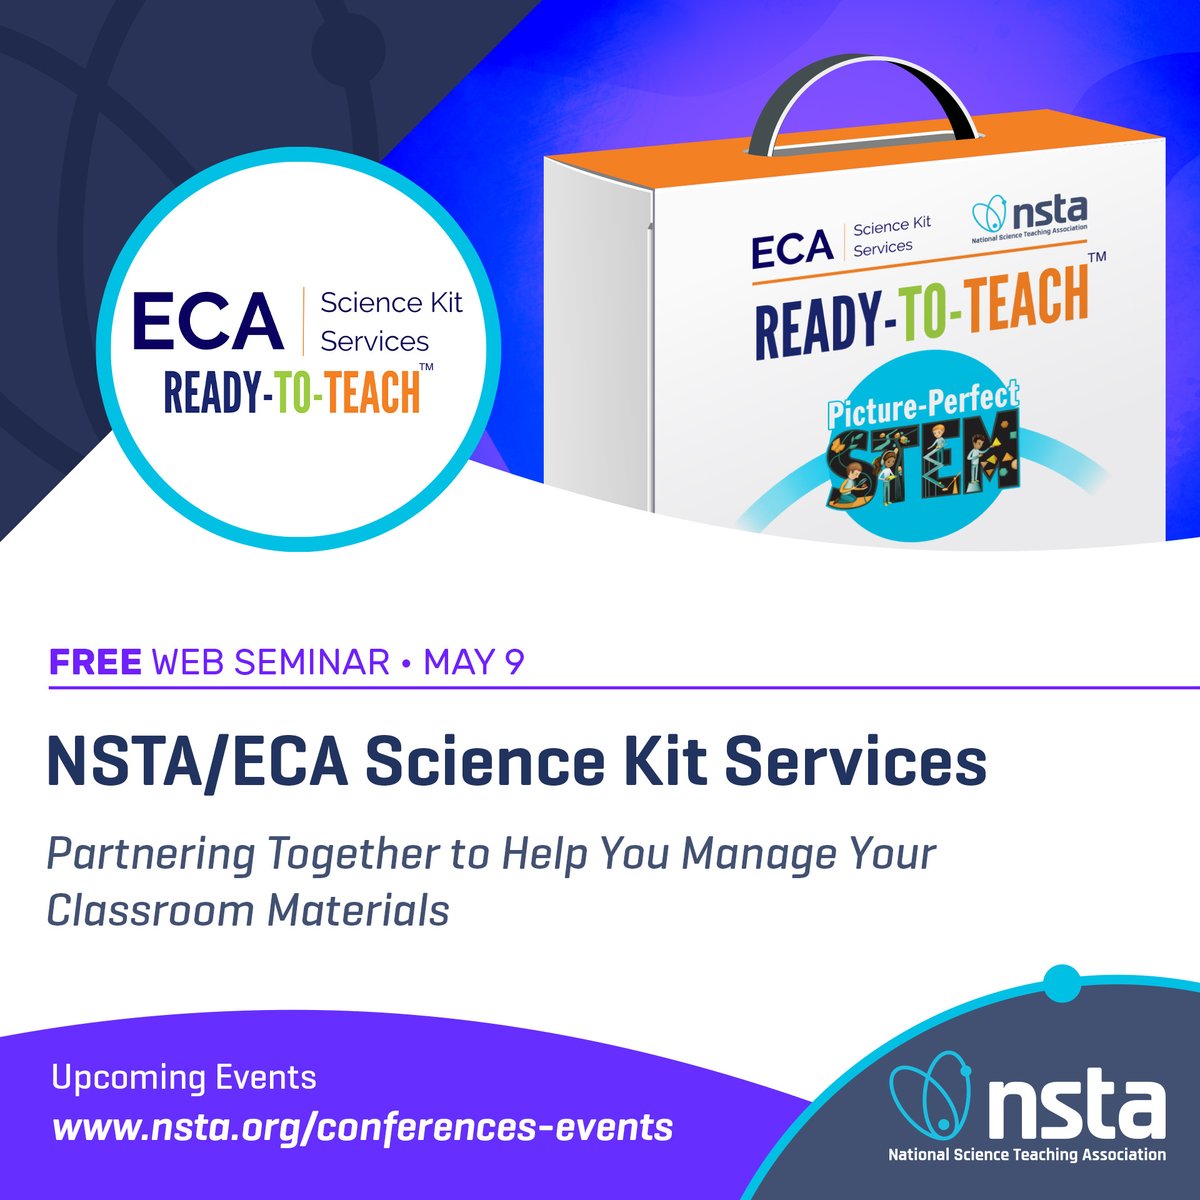 Join #NSTA on May 9 @ 7 PM ET for a web seminar presented by @ECA_ScienceKits to learn about successful science material management in school districts and to discover new ways to set your district up for success! Register at bit.ly/3wgn4nr #SciEd #STEMEd